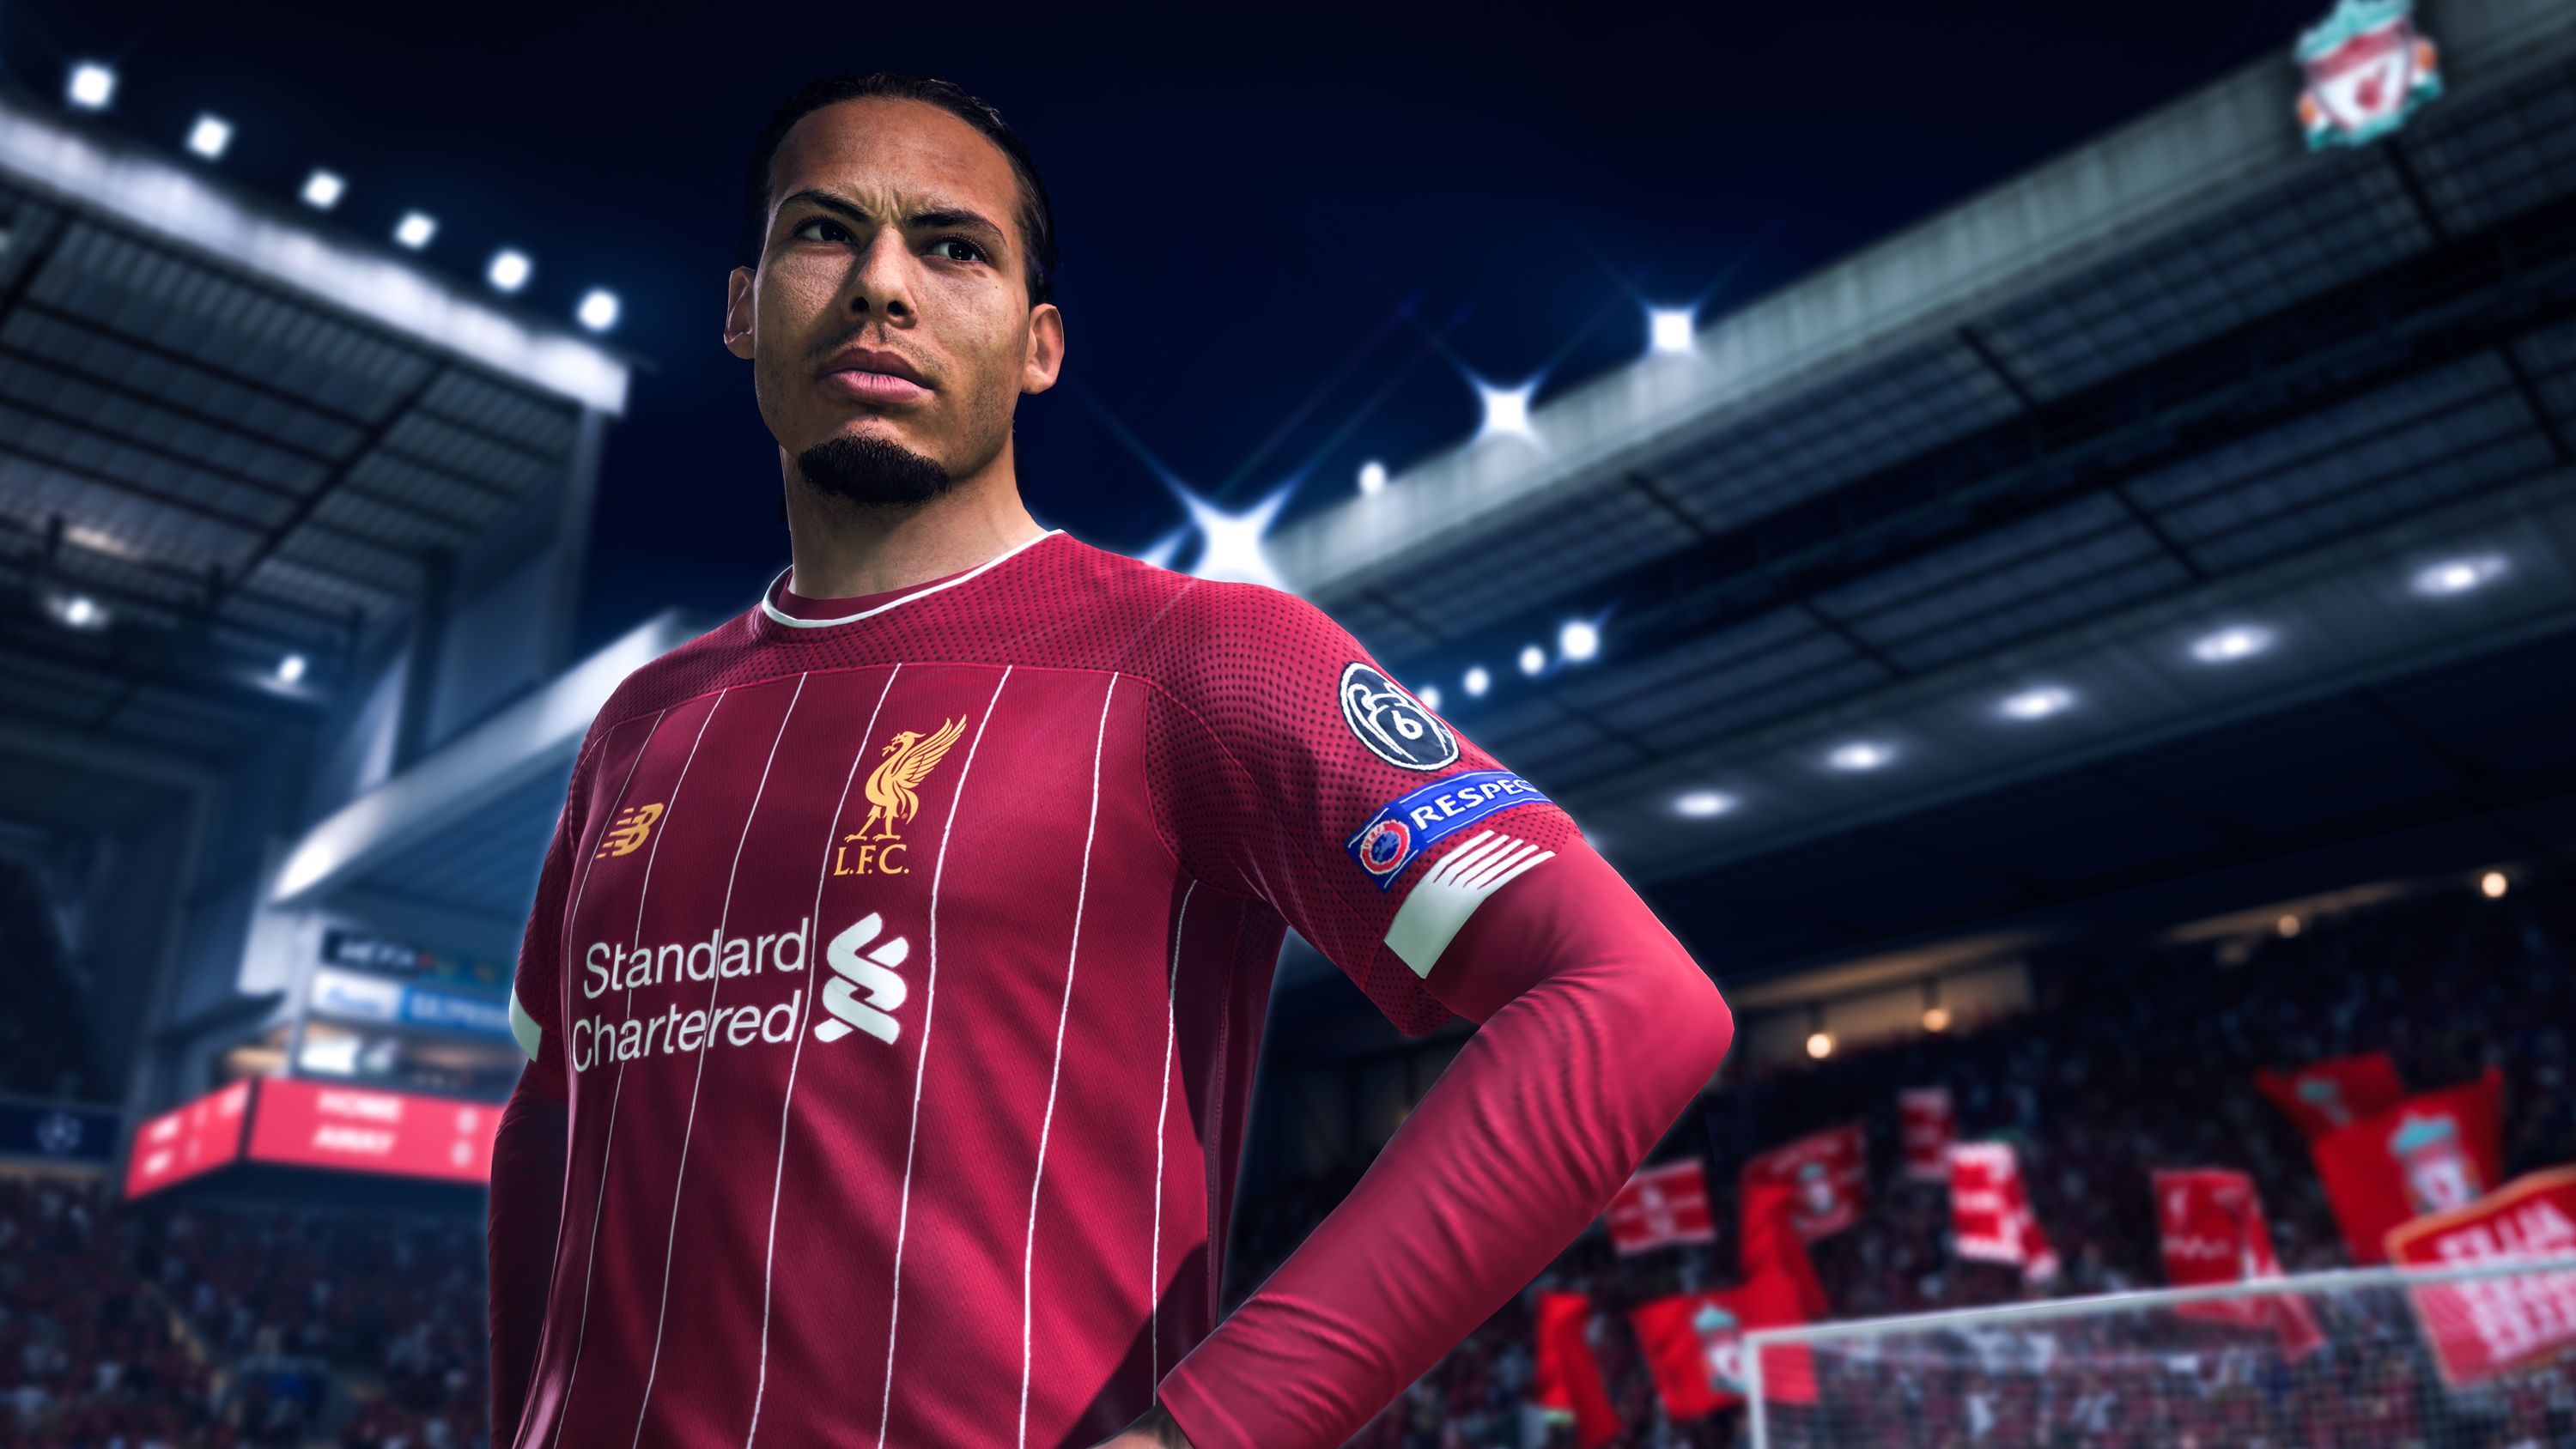 FIFA 21: trailer and everything we know about the next FIFA game